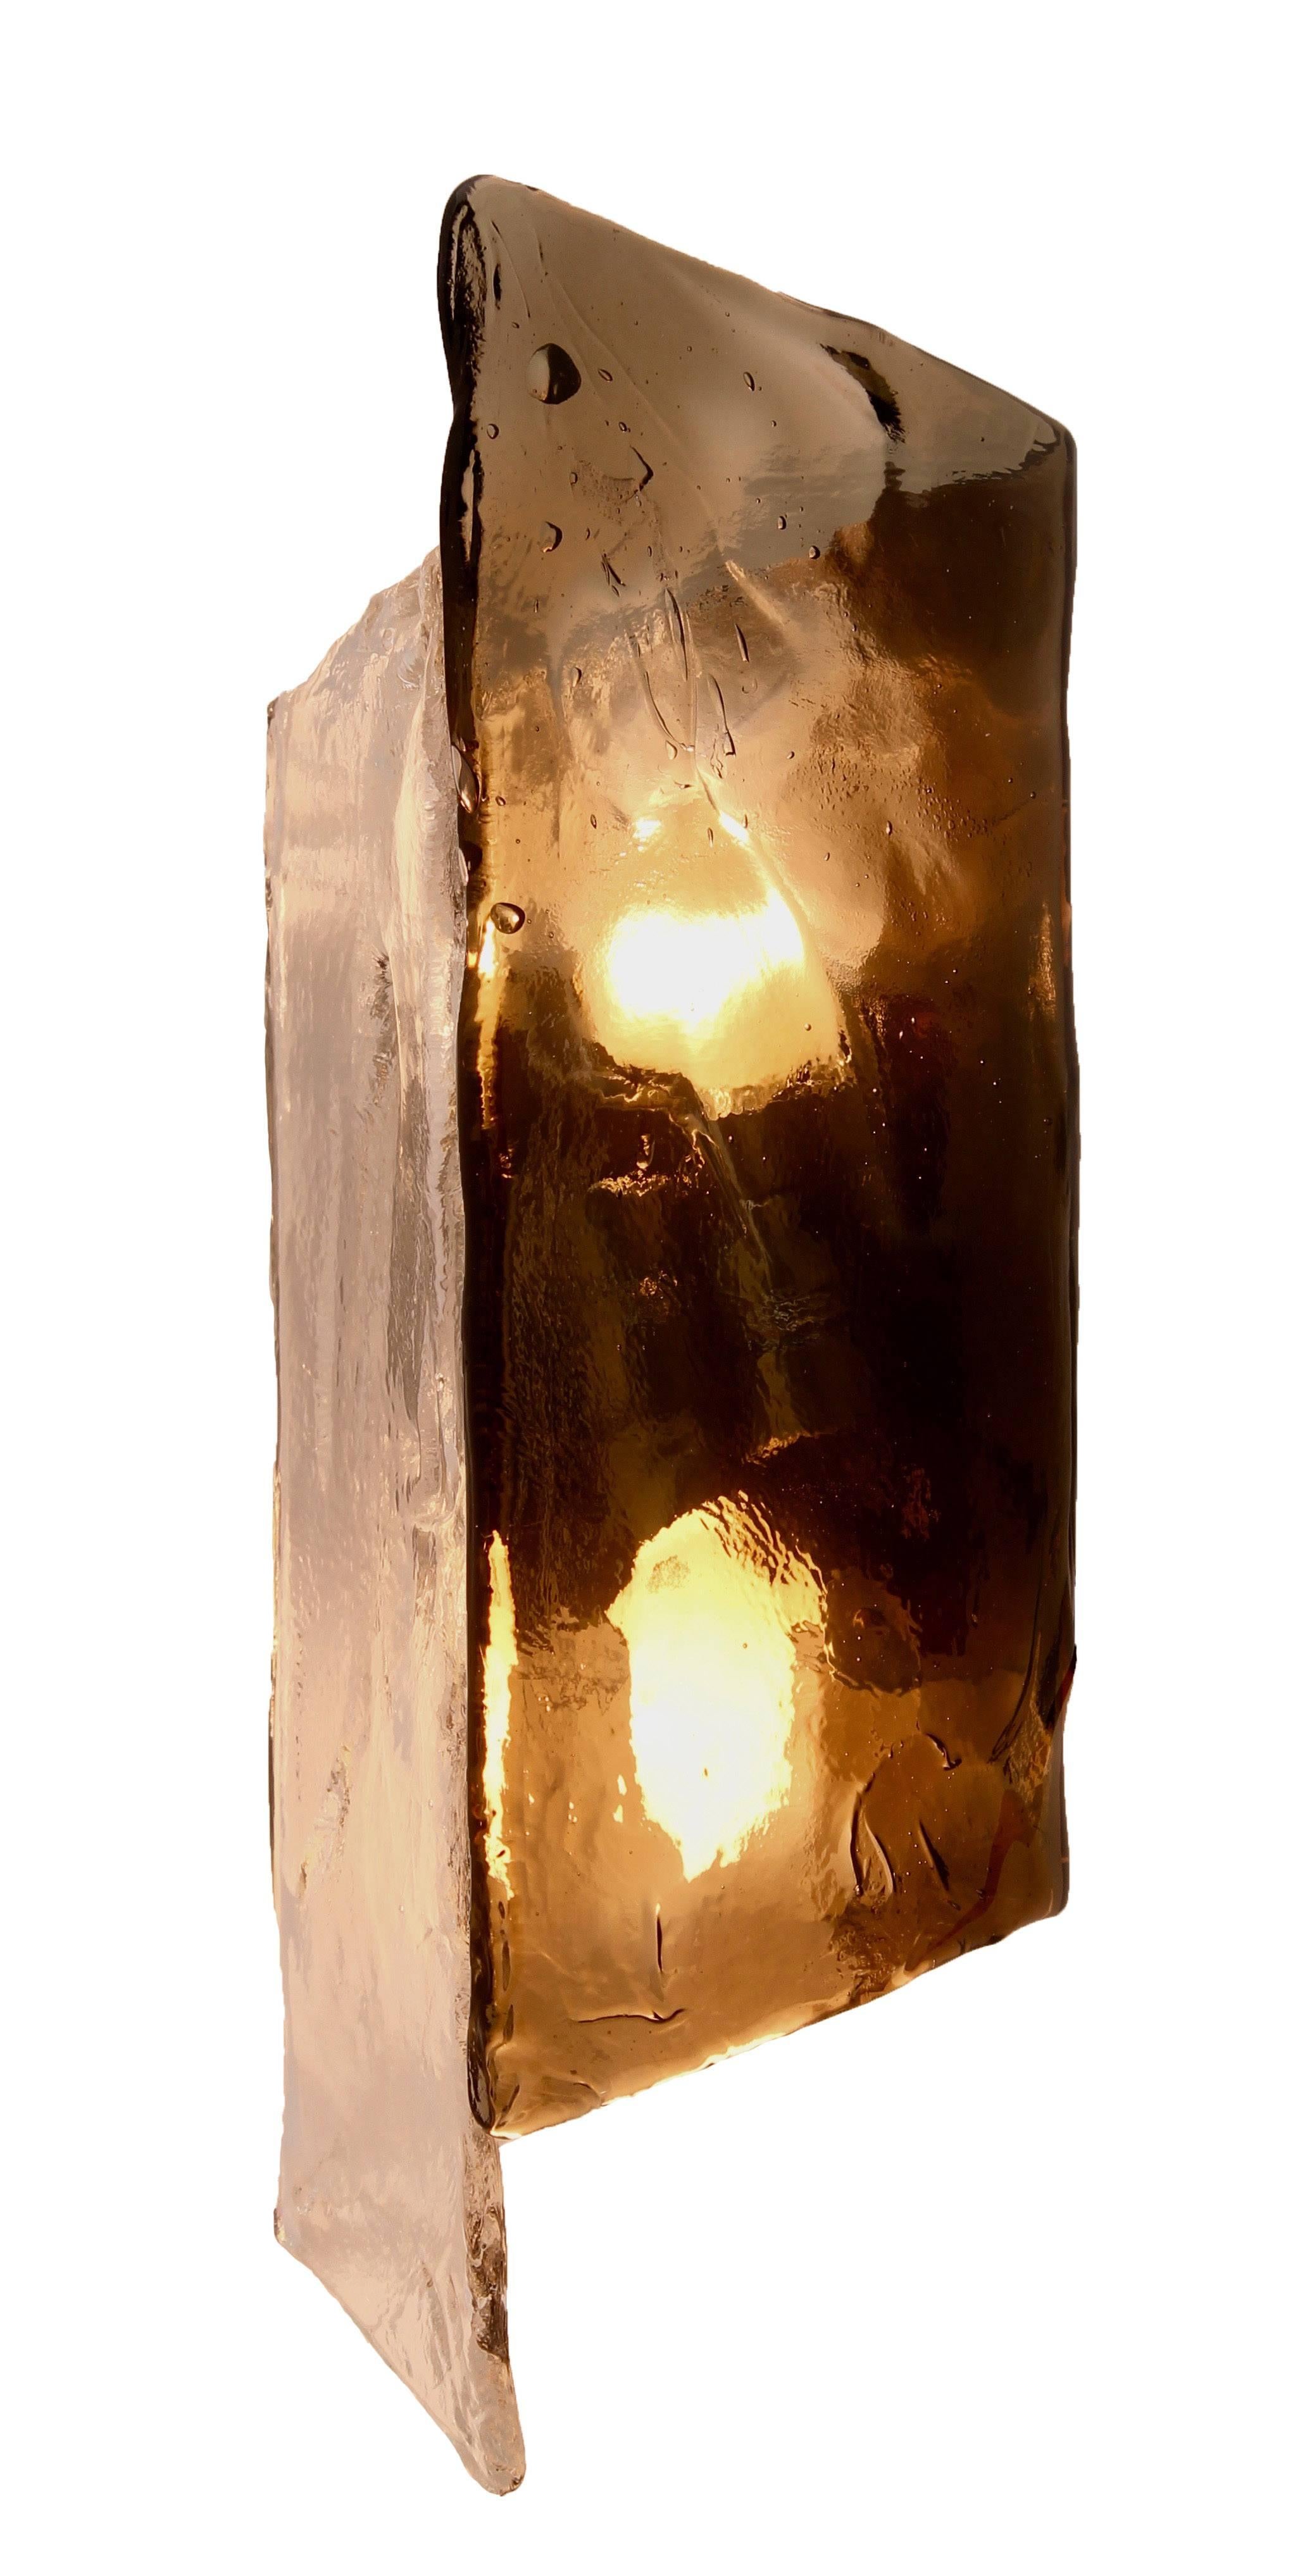 Hand-Crafted Impressive J.T Kalmar Frosted Glass Sconces Made from Thick and Heavy Cast Glass